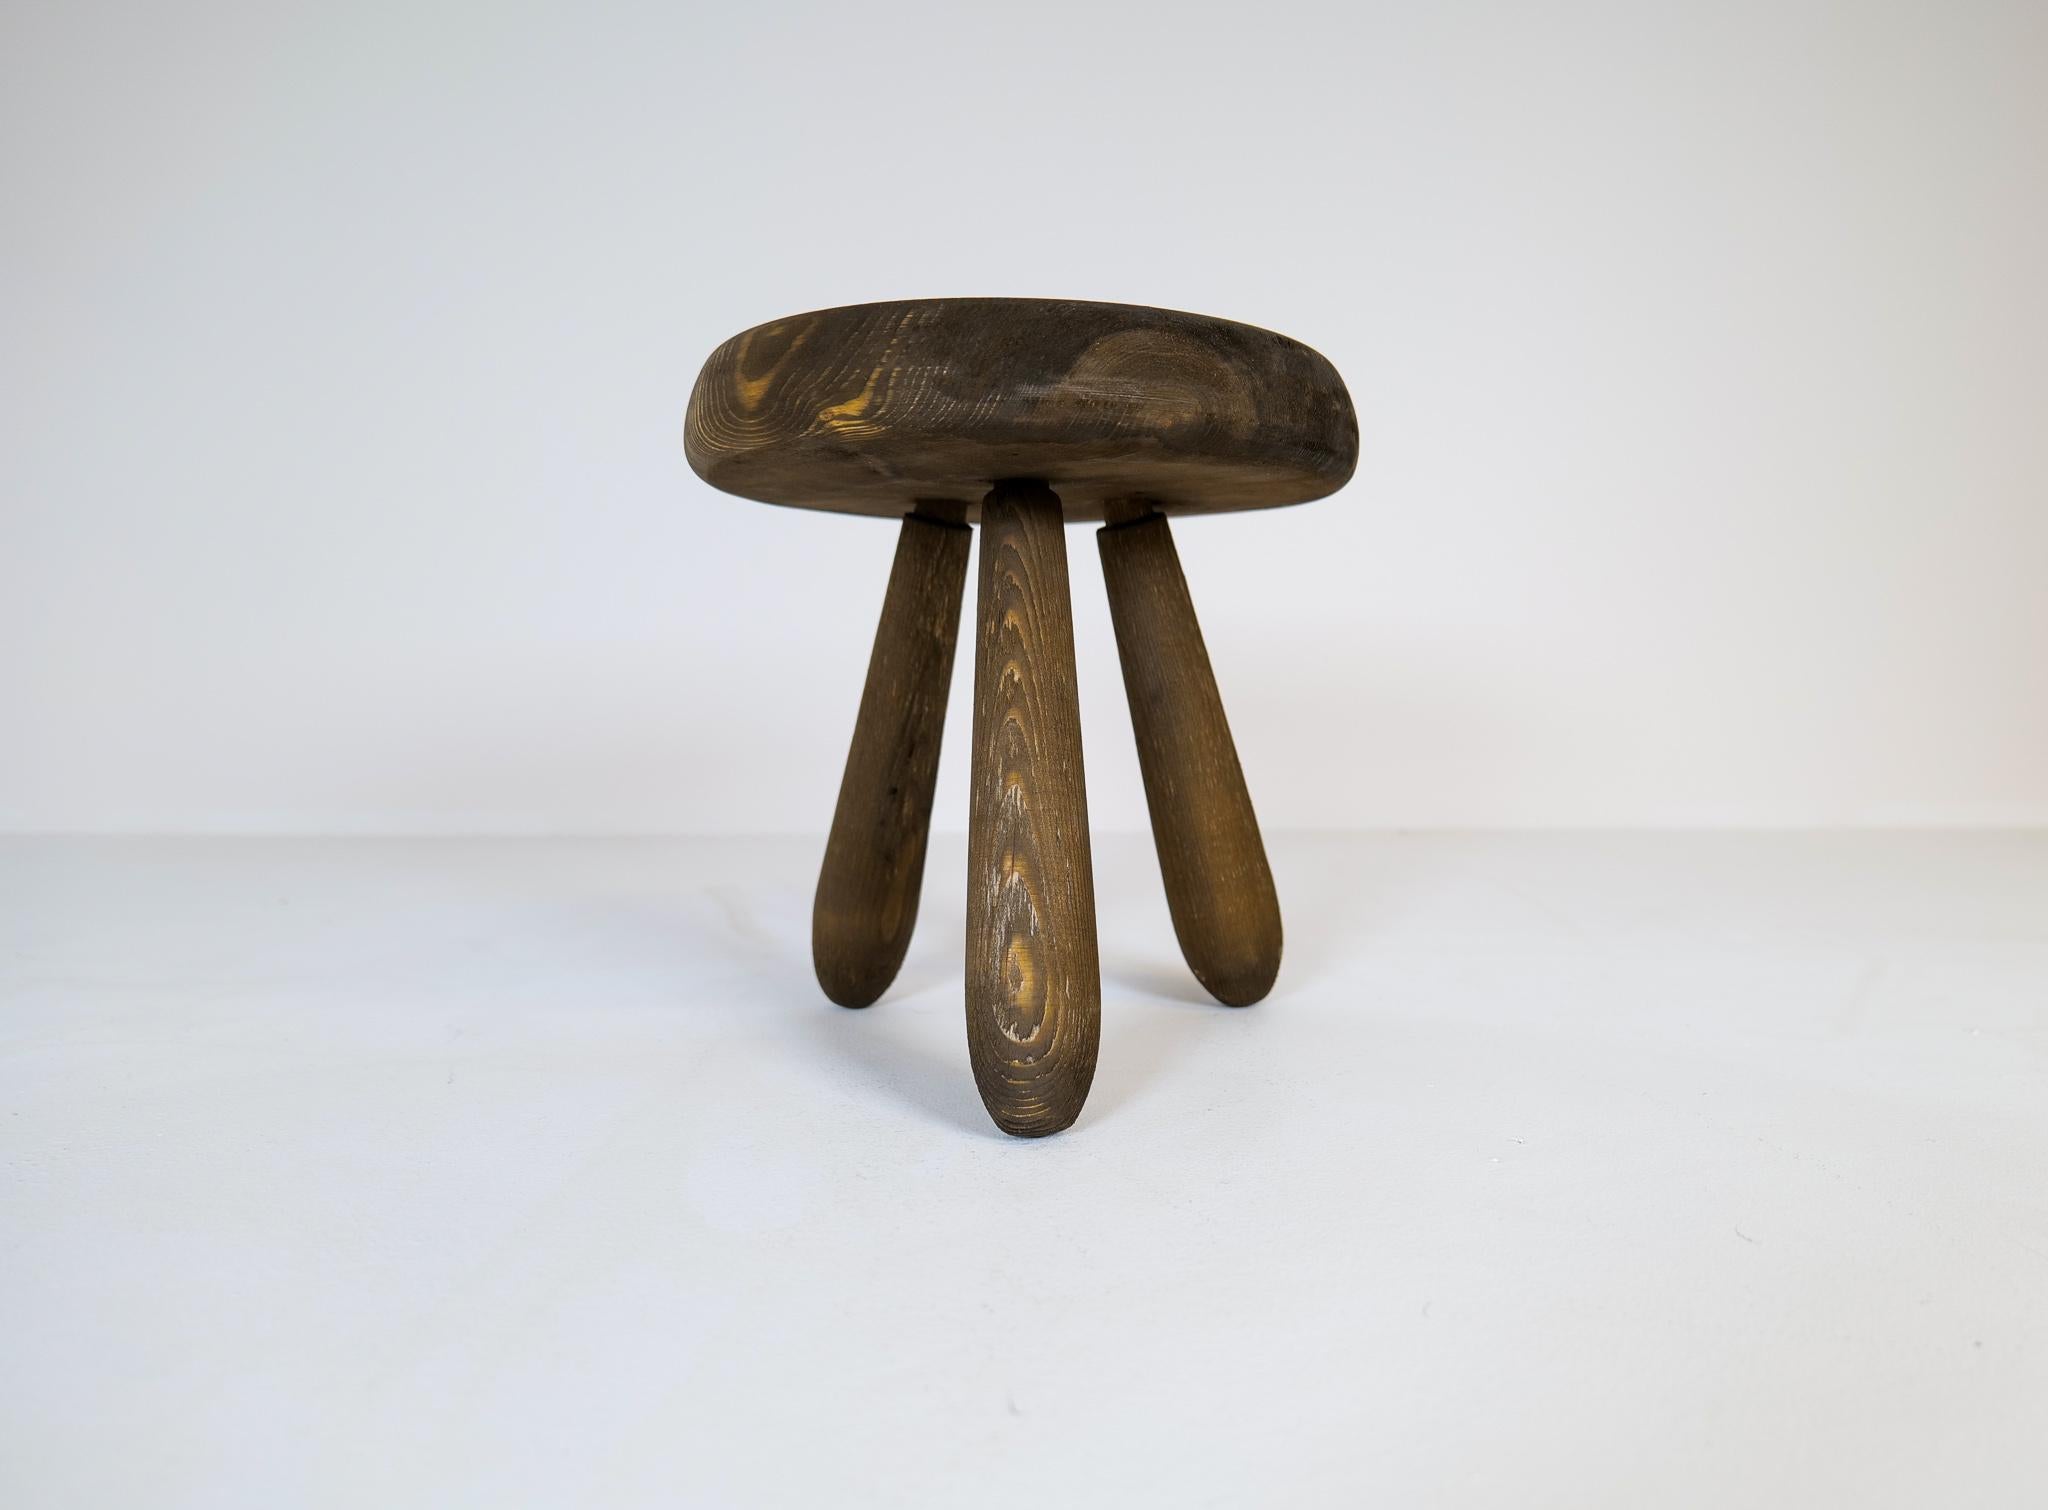 A small stool in stained solid pine with rare complexity in the different colors of the wood.
This stool is a good example of the good craftsmanship and minimalistic stile to come in Scandinavian furniture. 

 Very good original condition with a